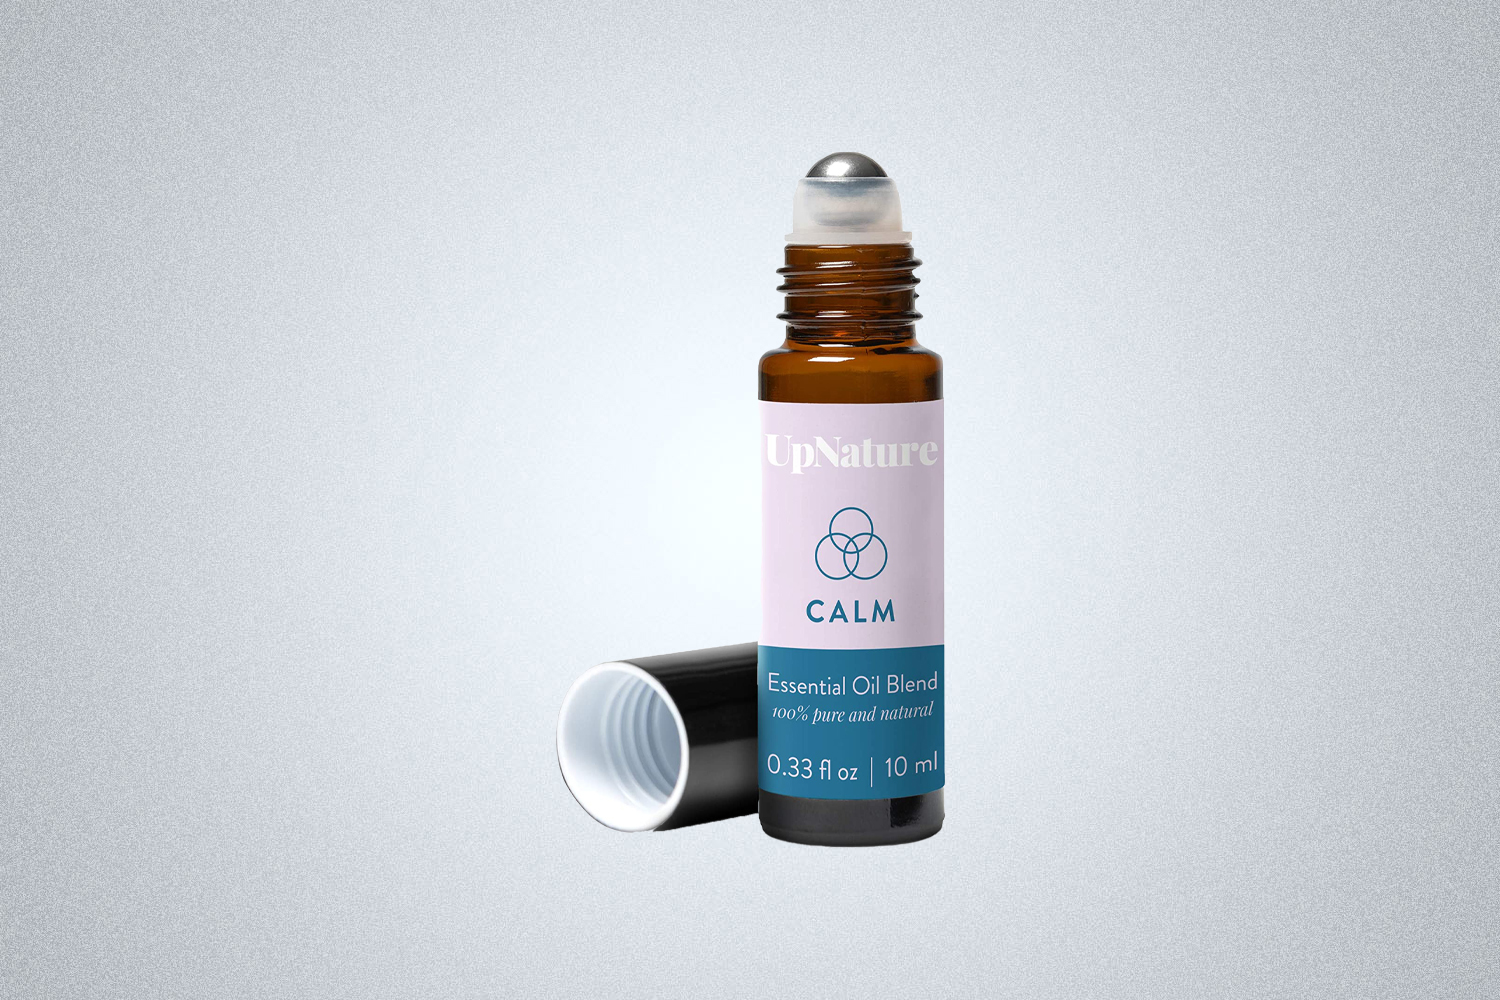 The UpNature Calm Essential Oil Blend is one of the best calming sleep products in 2022